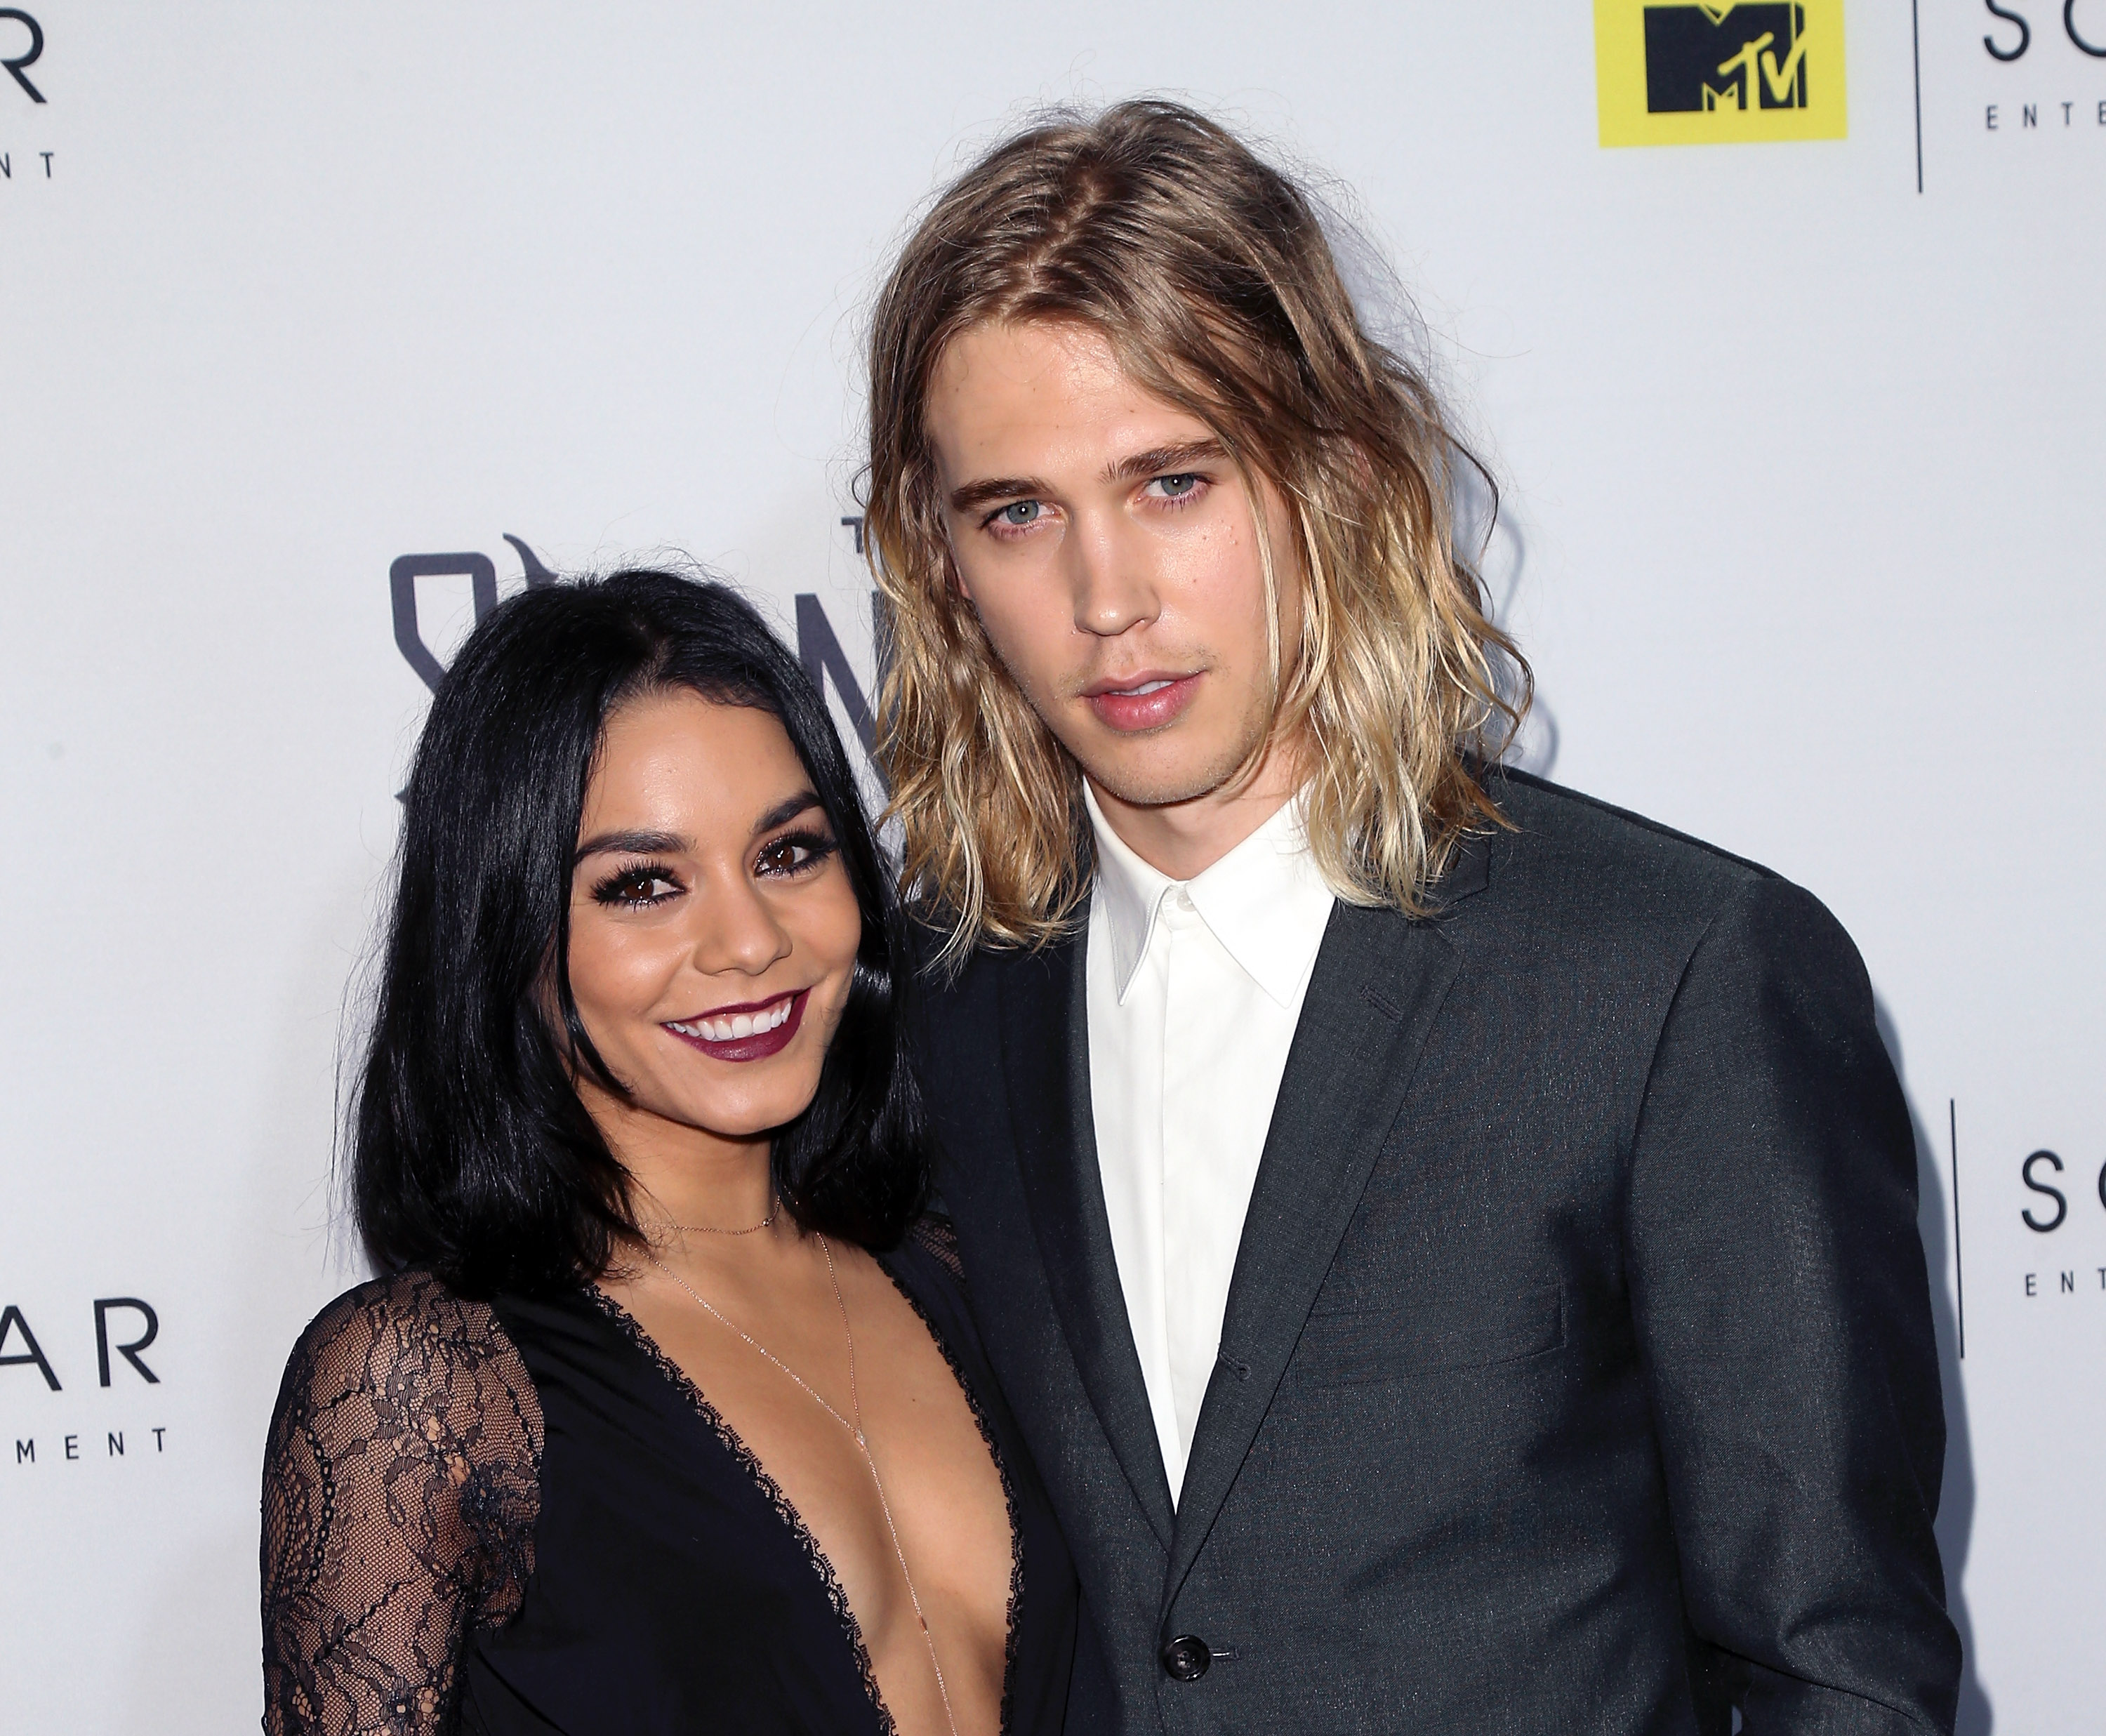 Actors Vanessa Hudgens (L) and Austin Butler attend the premiere of MTV's "The Shannara Chronicles" at iPic Theaters on Dec. 4, 2015 in Los Angeles, California. (David Livingston/Getty Images)